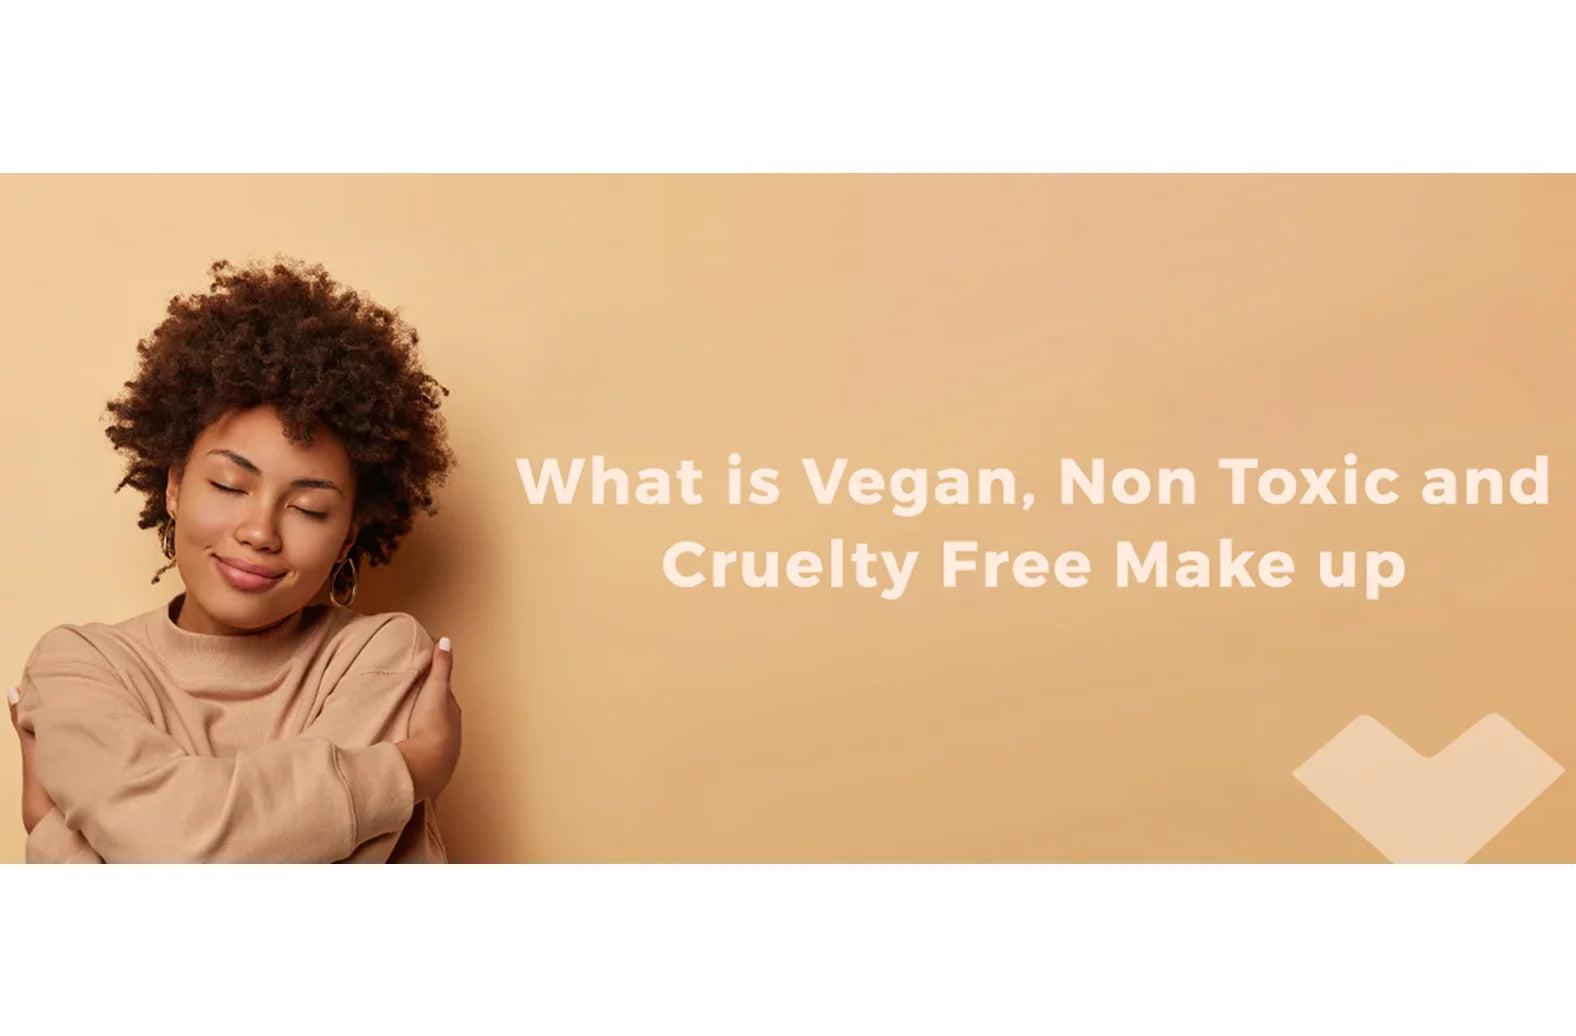 What is Vegan, Non-Toxic and Cruelty Free Make up?